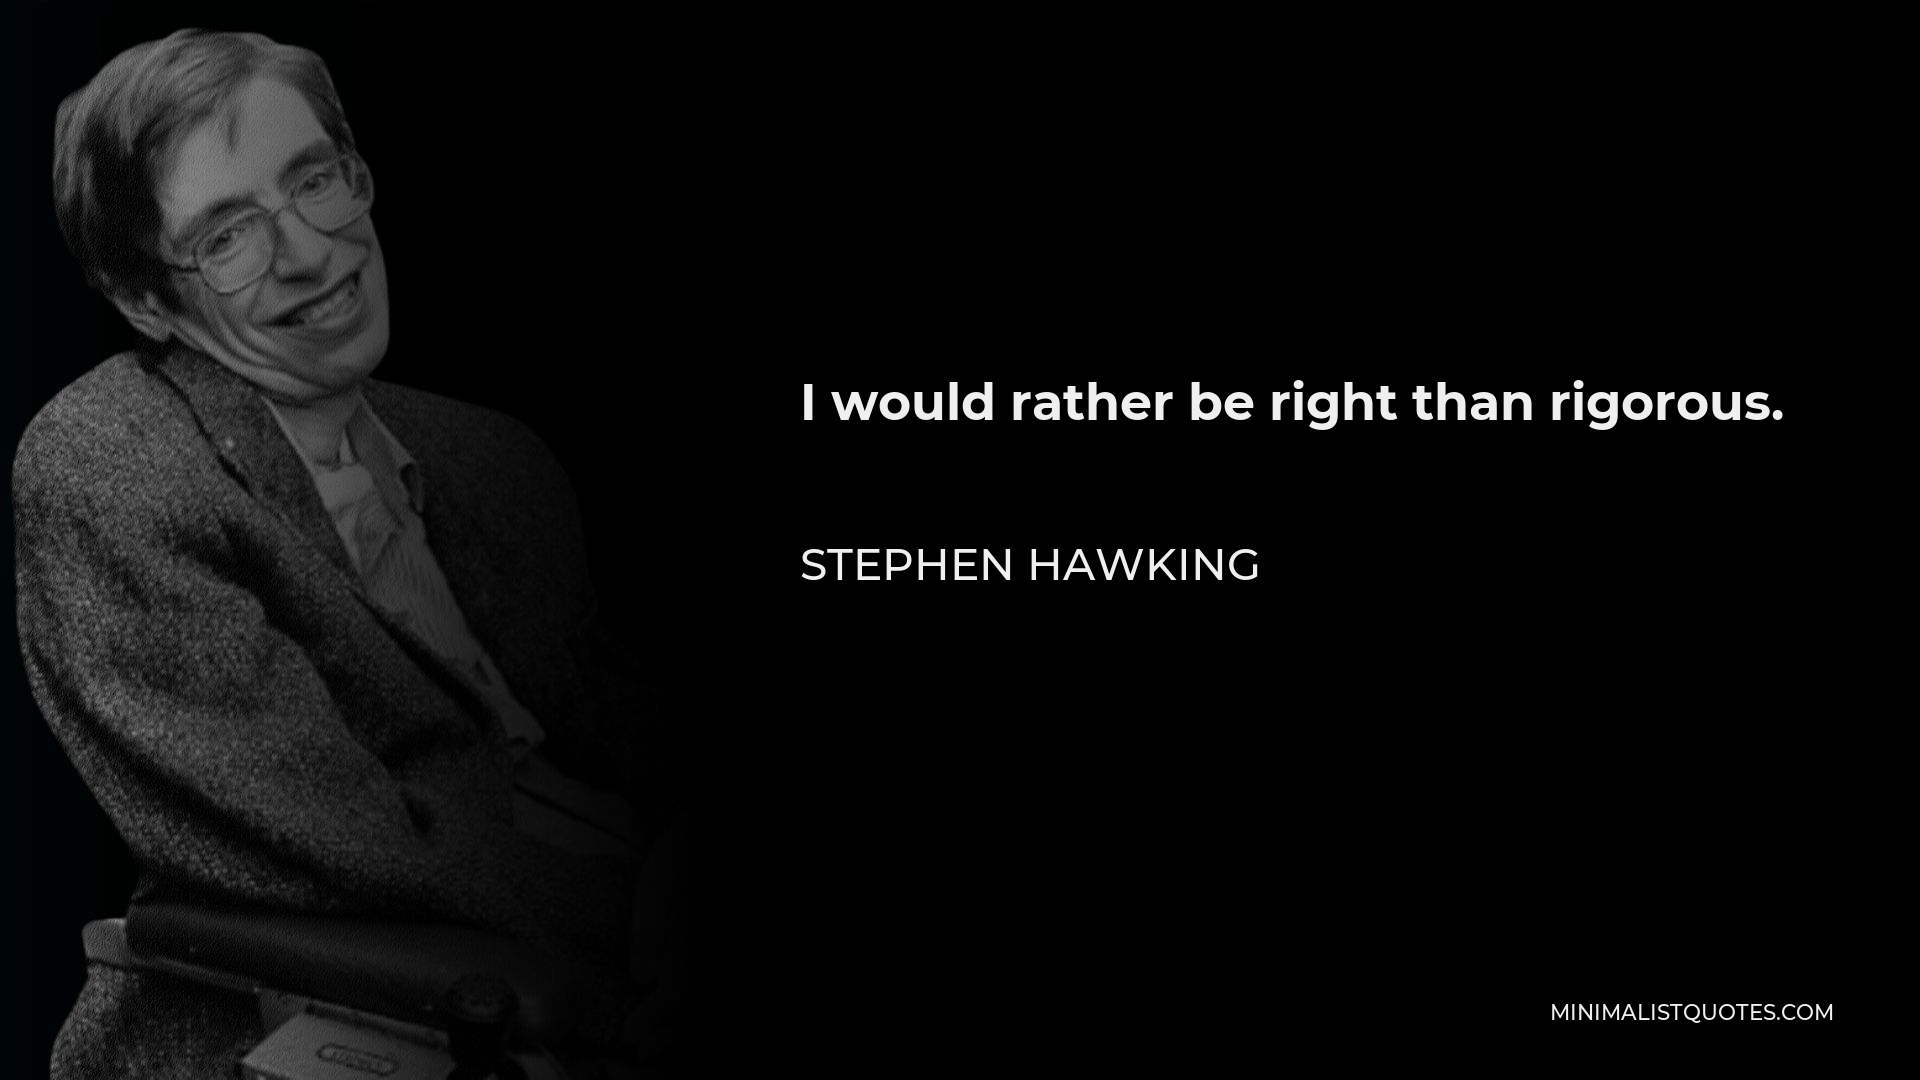 Stephen Hawking Quote - I would rather be right than rigorous.